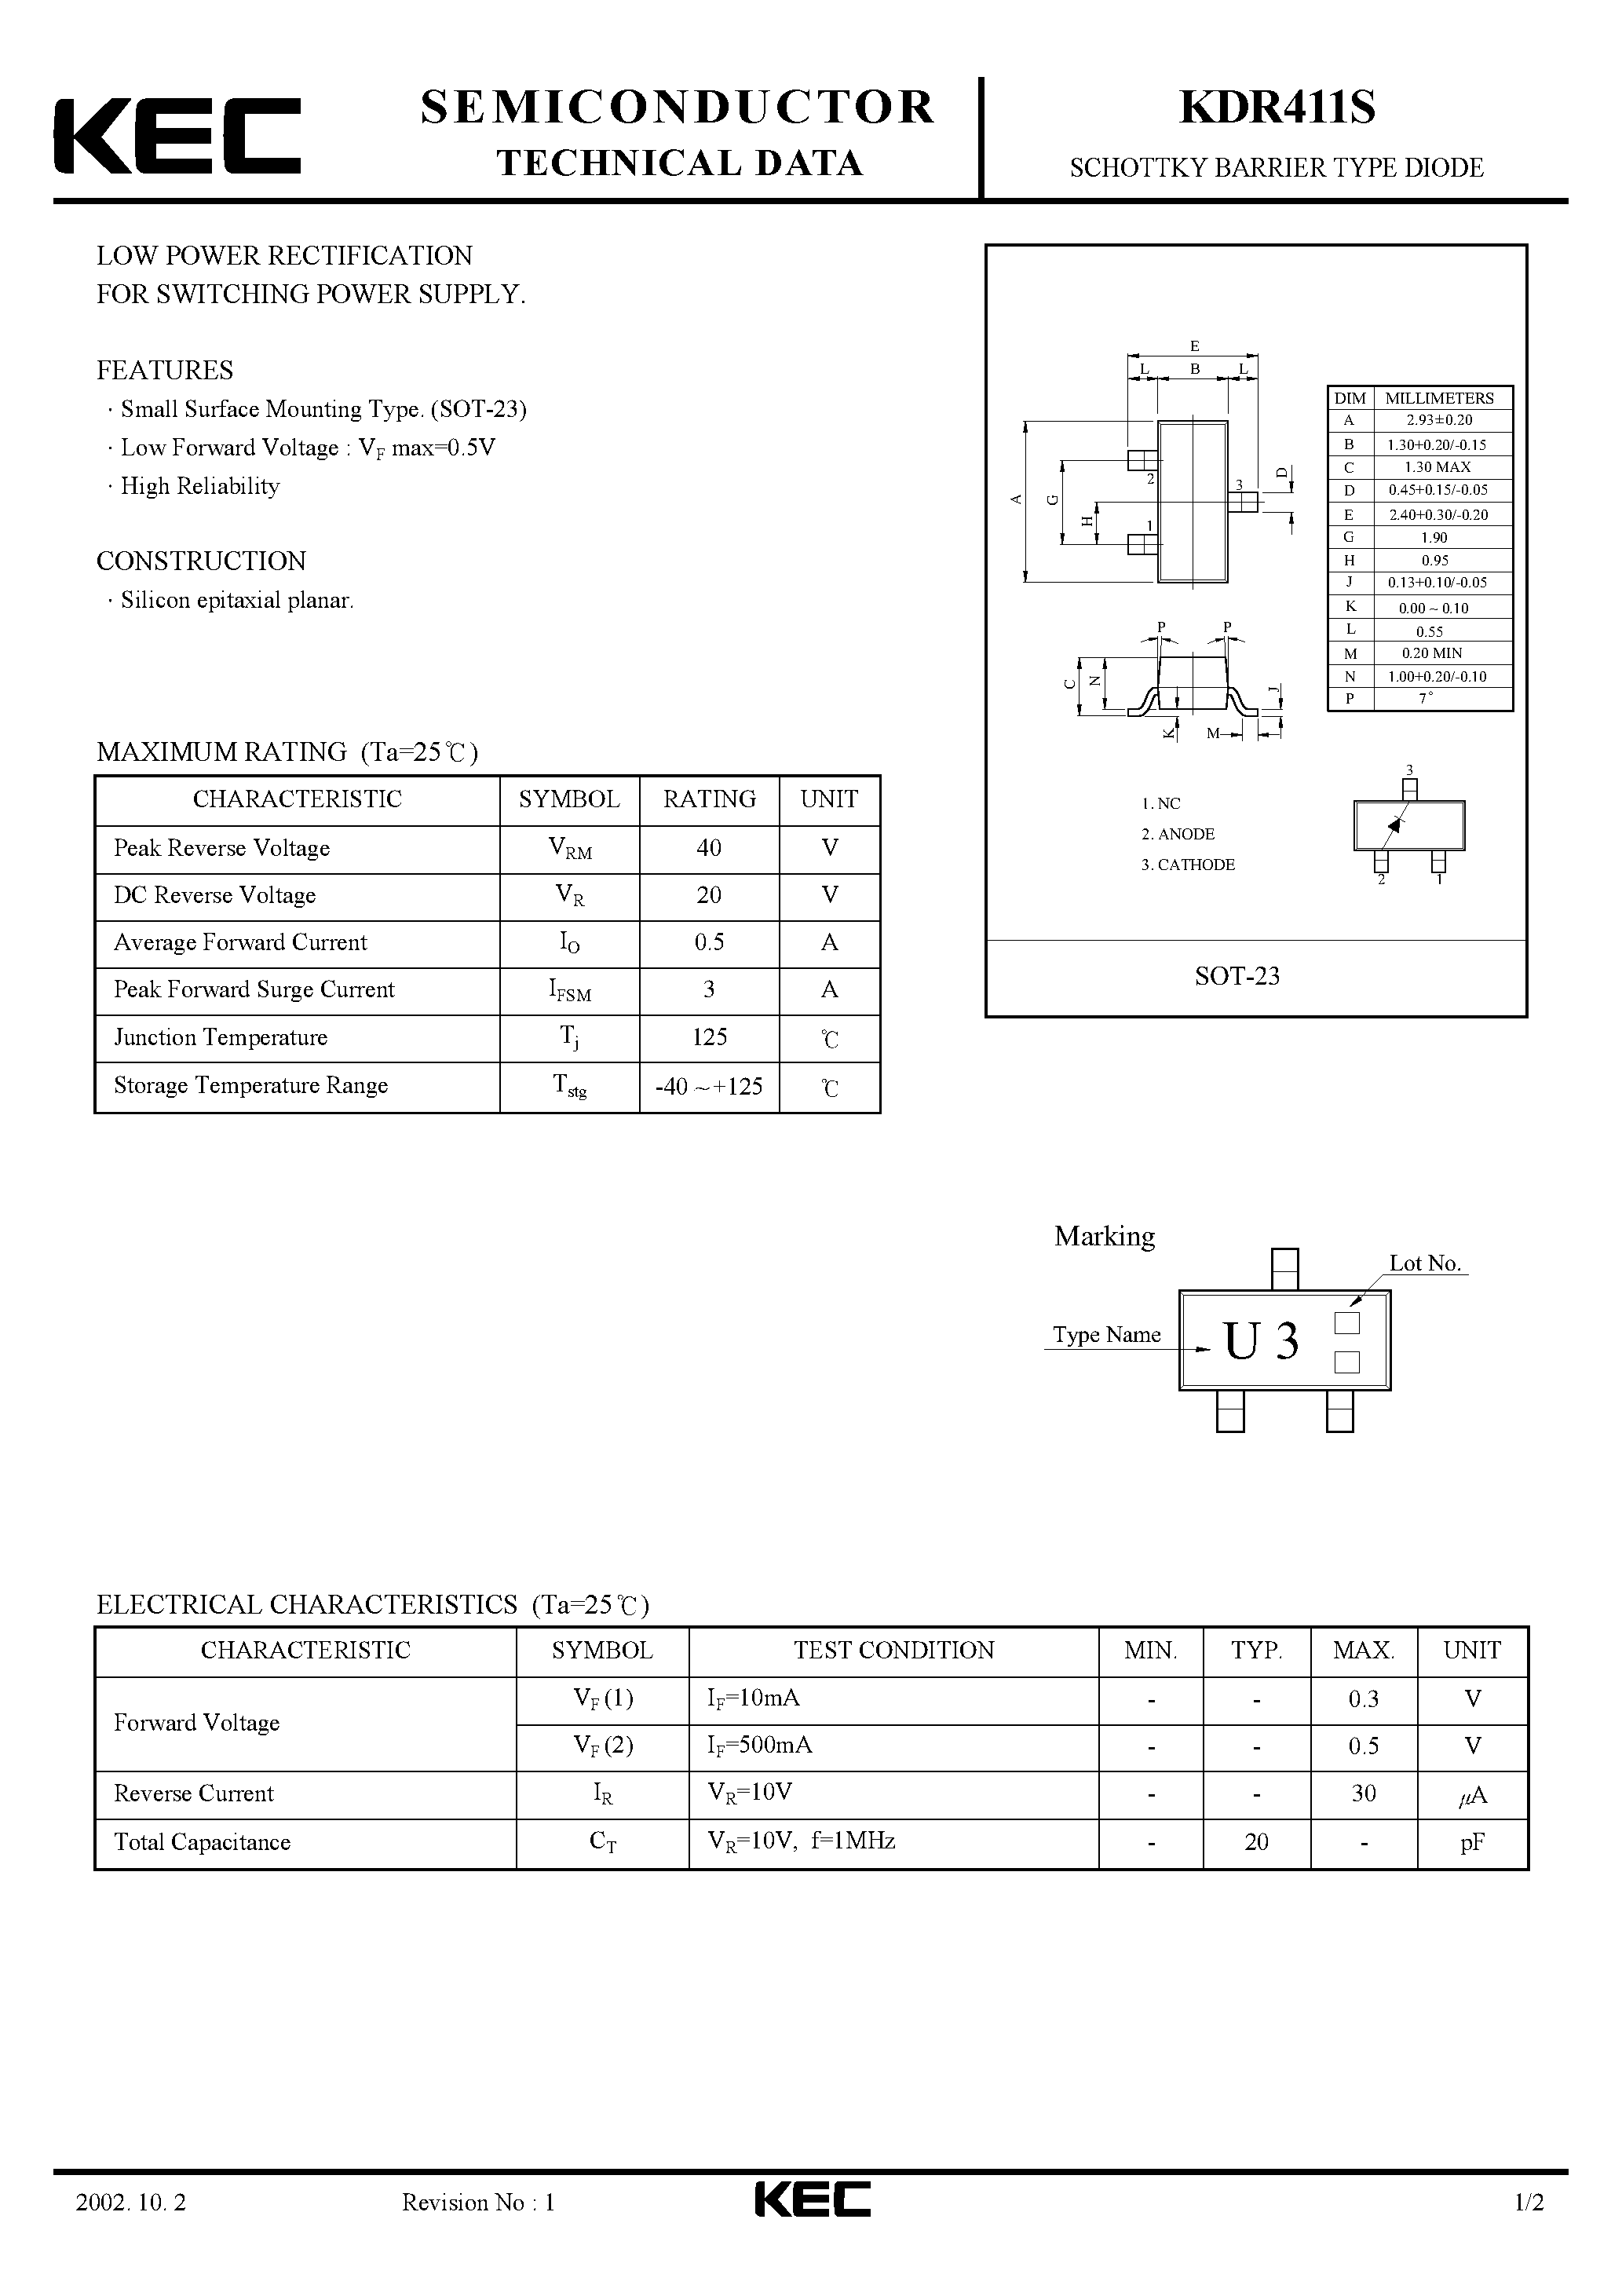 Datasheet KDR411S - SCHOTTKY BARRIER TYPE DIODE(LOW POWER RECTIFICATION/ FOR SWITCHING POWER SUPPLY) page 1